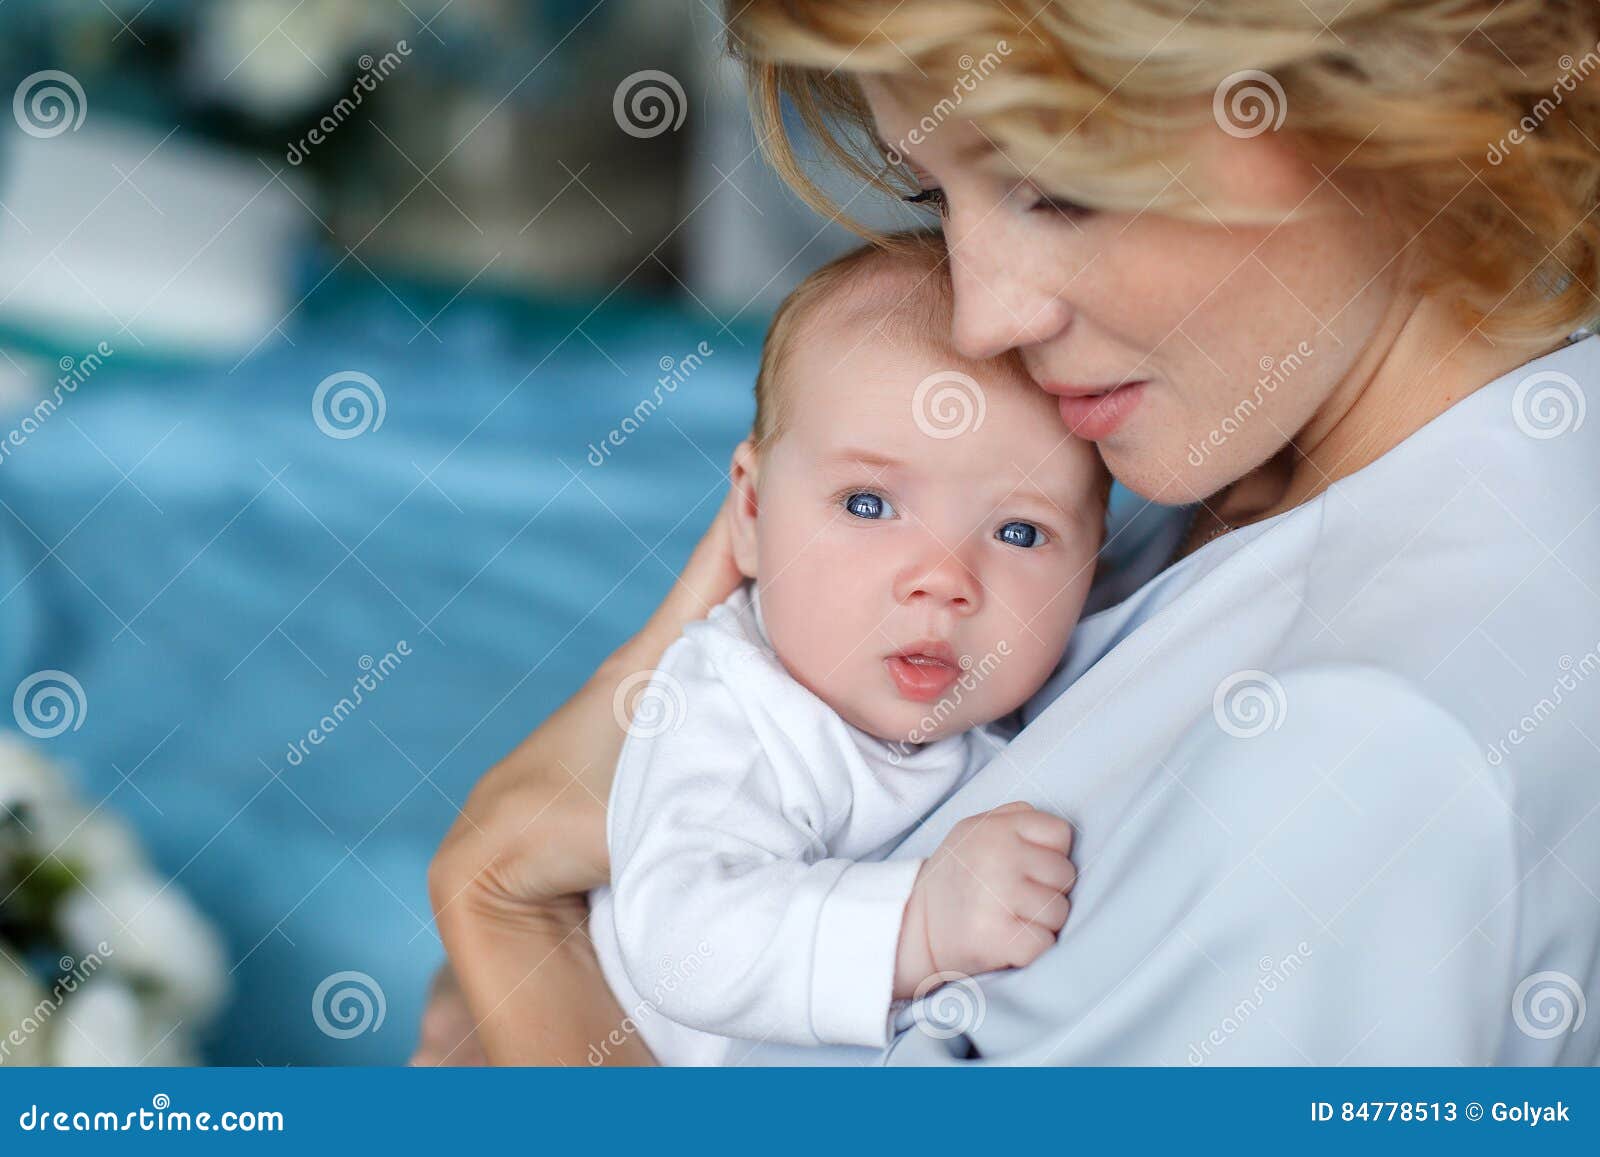 Mother Holding A Newborn Baby In Her Arms Stock Image Image Of